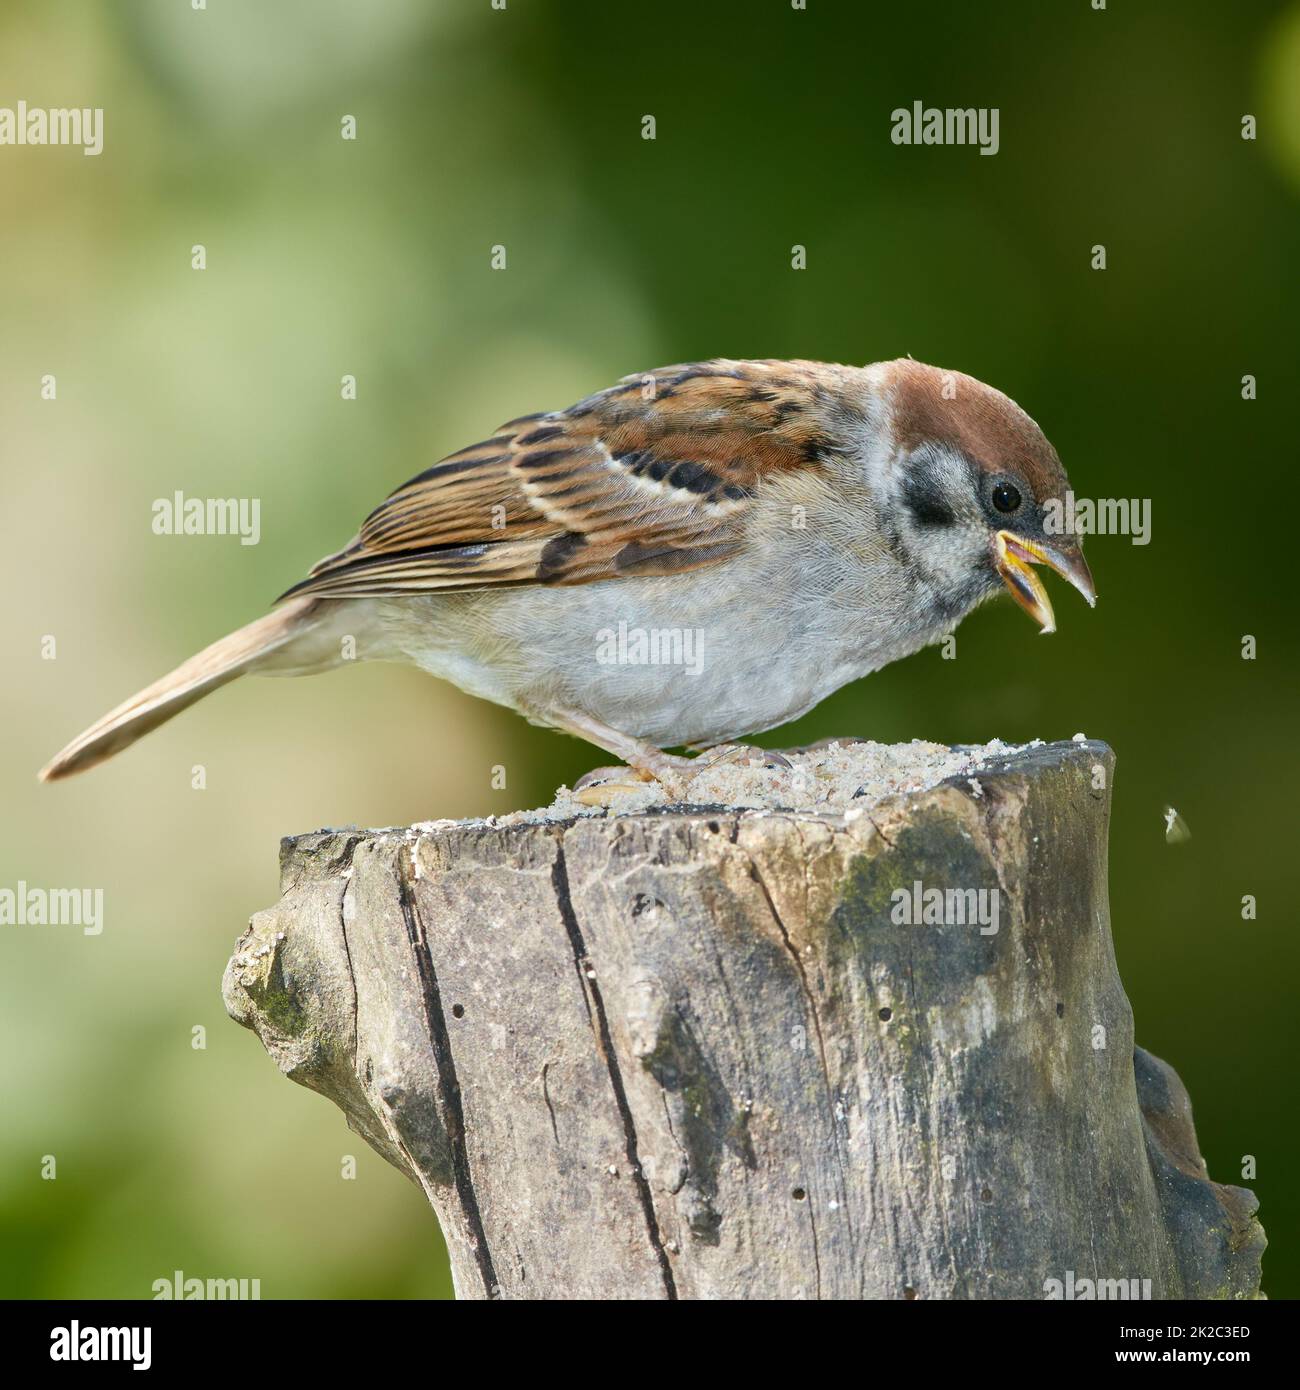 Sparrow. Sparrows are a family of small passerine birds, Passeridae. They are also known as true sparrows, or Old World sparrows, names also used for a particular genus of the family, Passer. Stock Photo